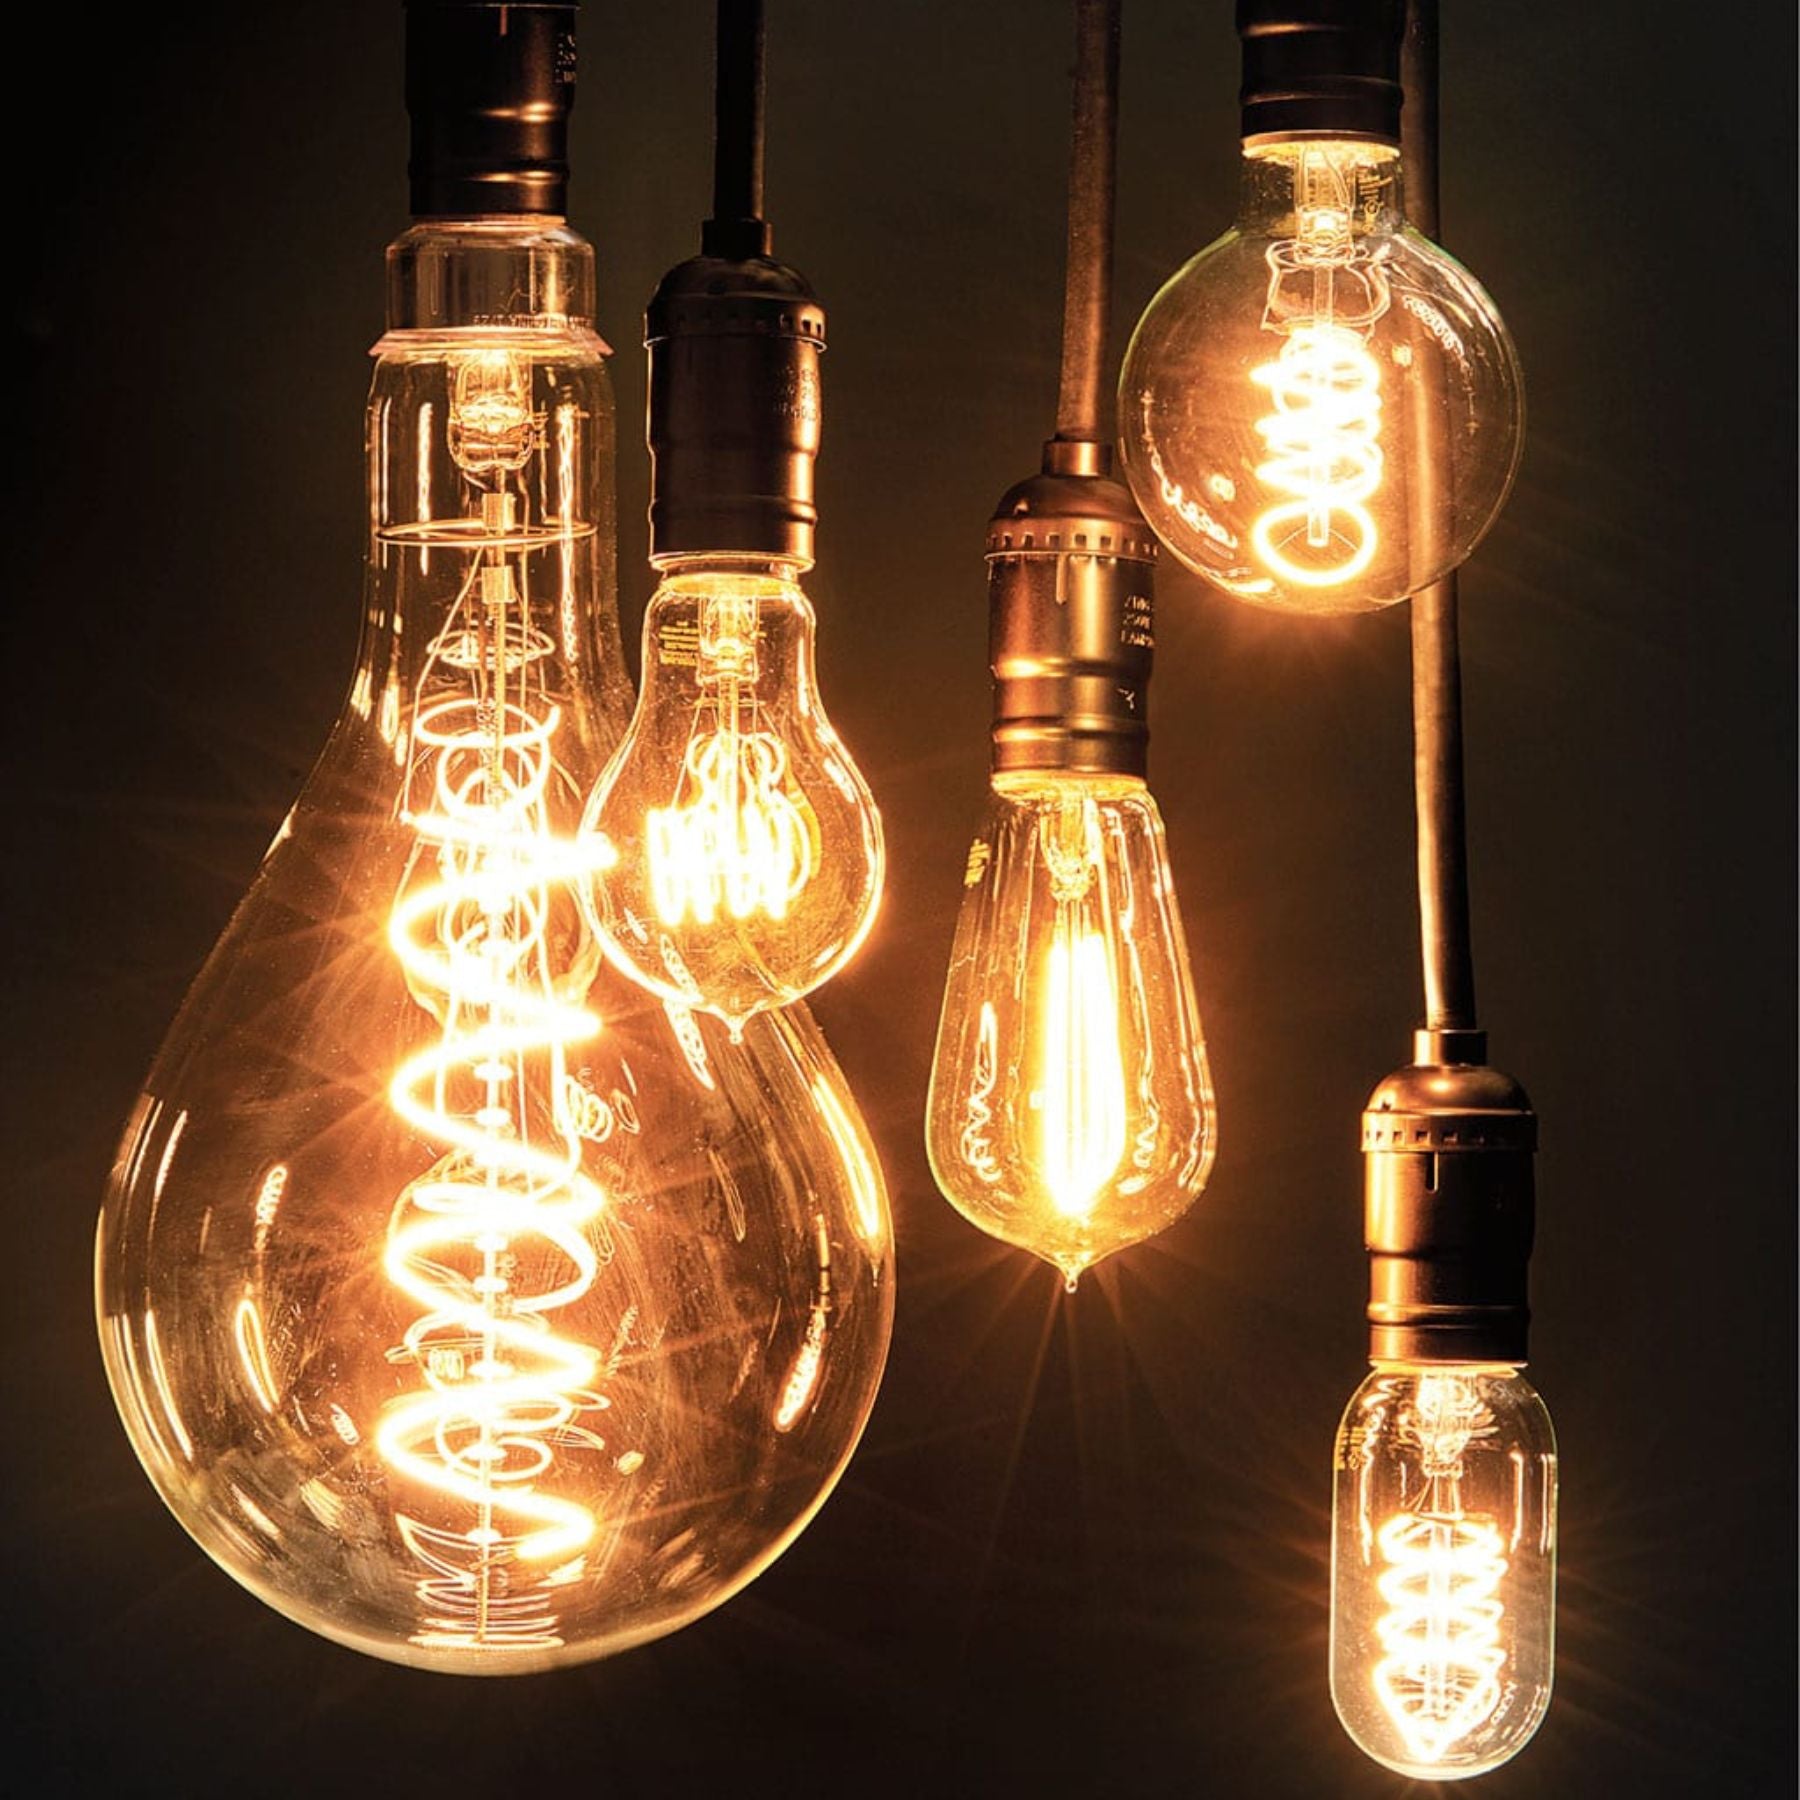 consider the art of warmth through carefully selected light bulbs